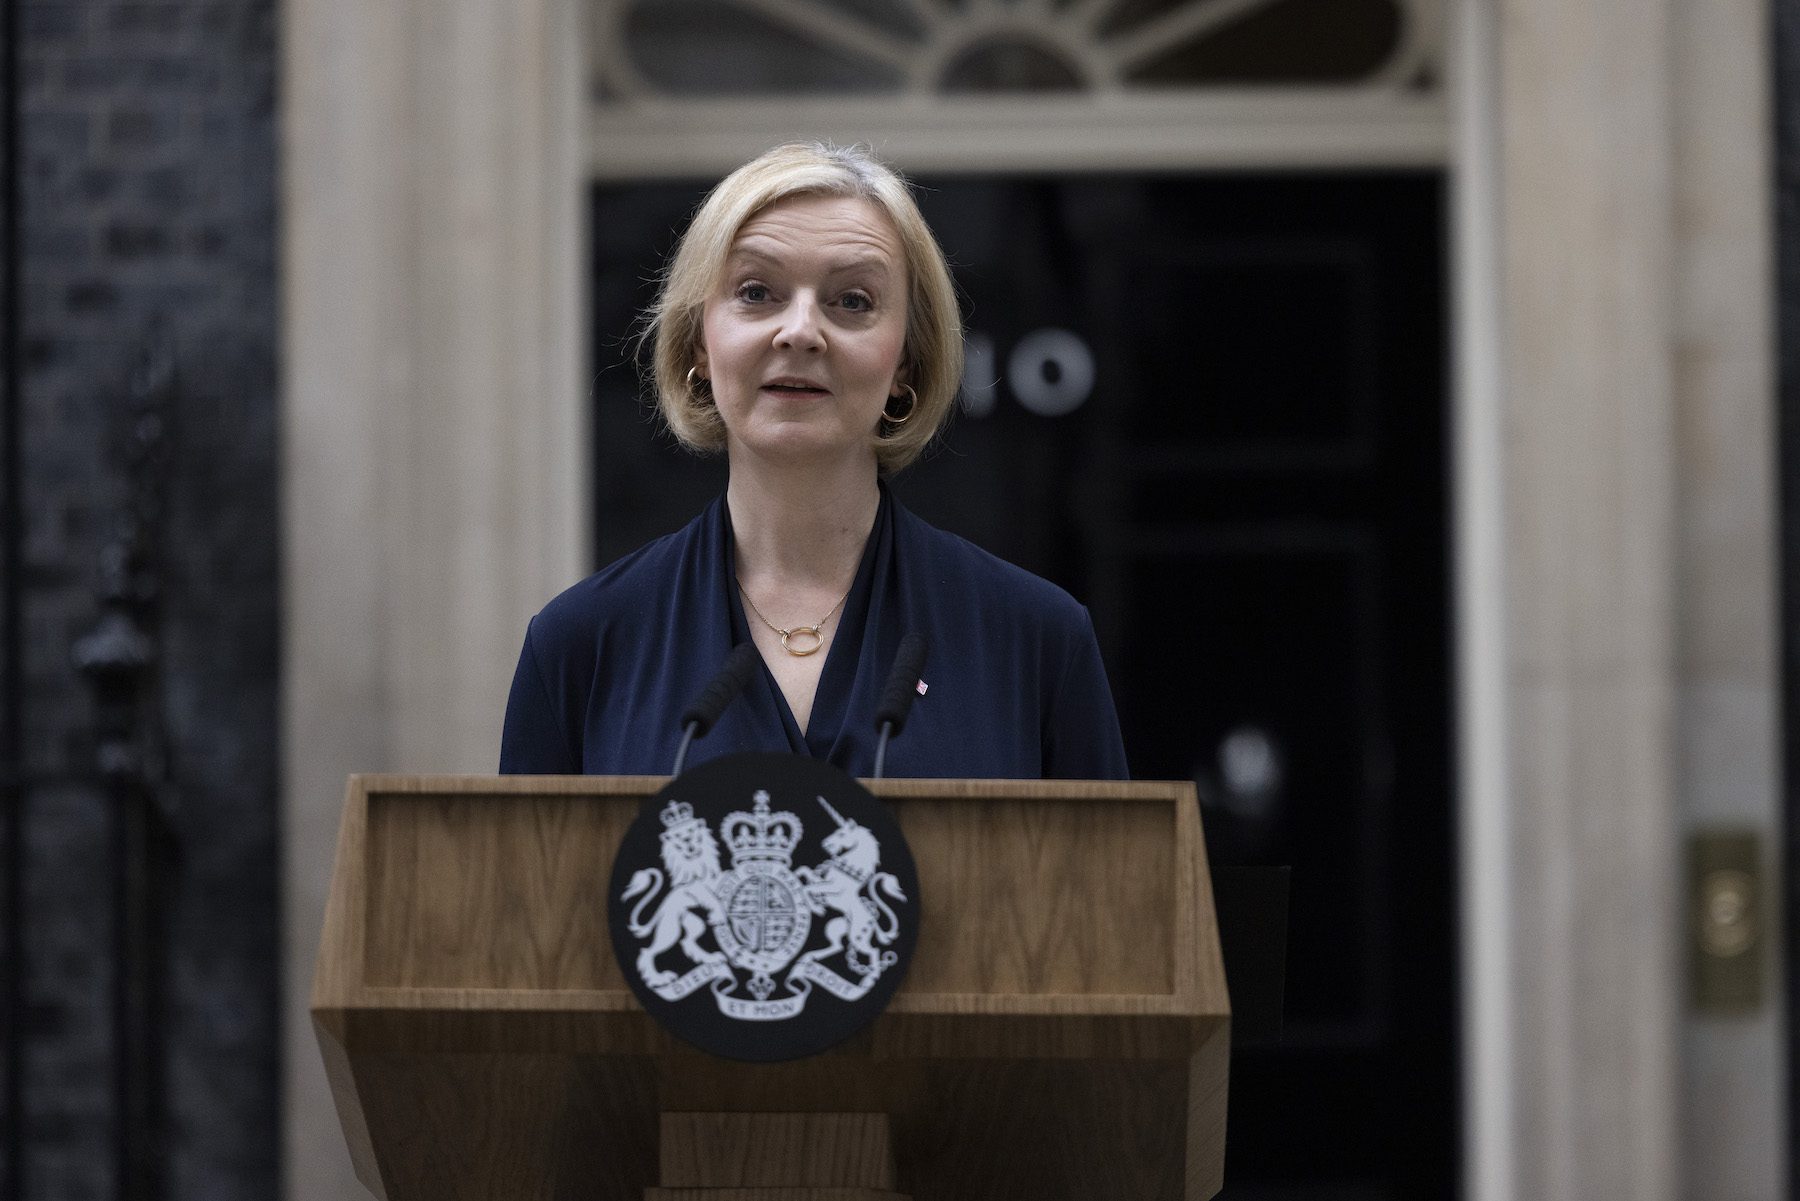 ‘It couldn’t get much worse’ – UK tech reacts to Liz Truss’s fateful stint as PM